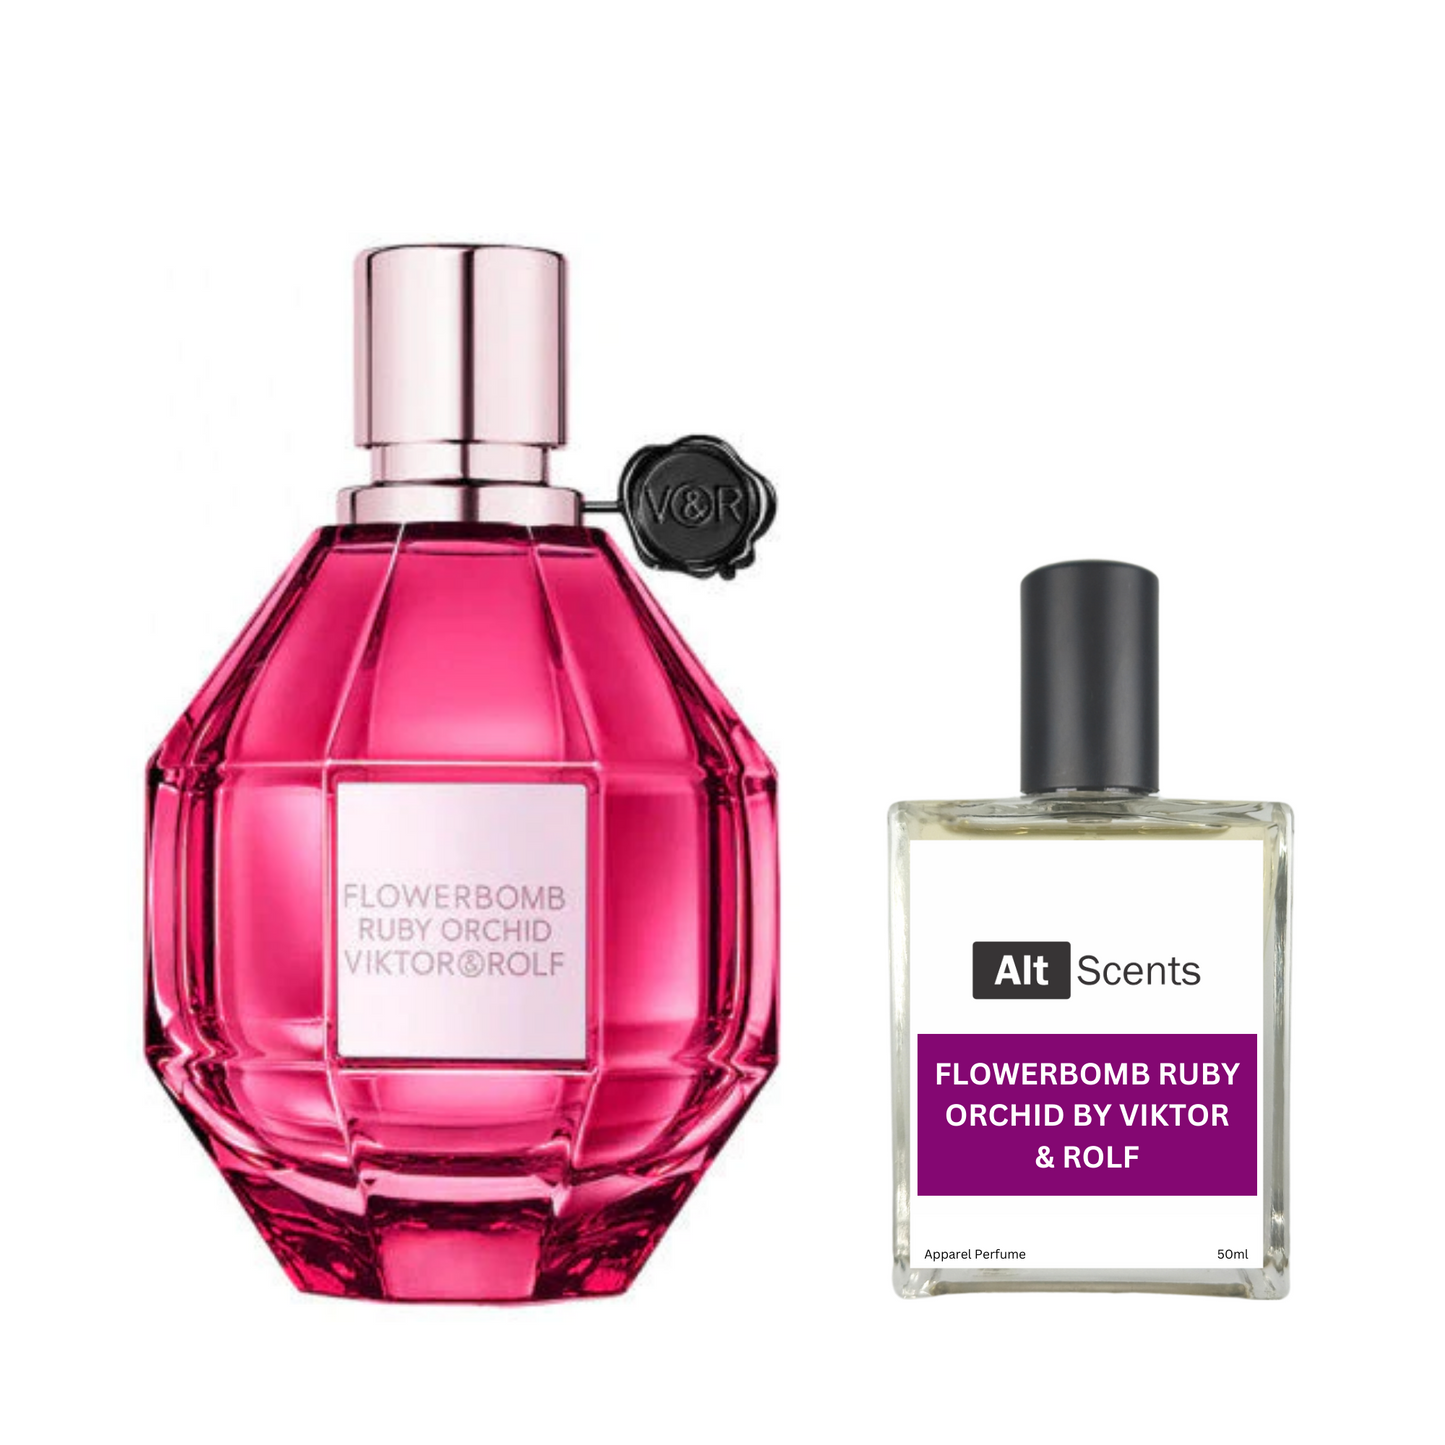 Flowerbomb Ruby Orchid by Viktor & Rolf for women type Perfume for Women